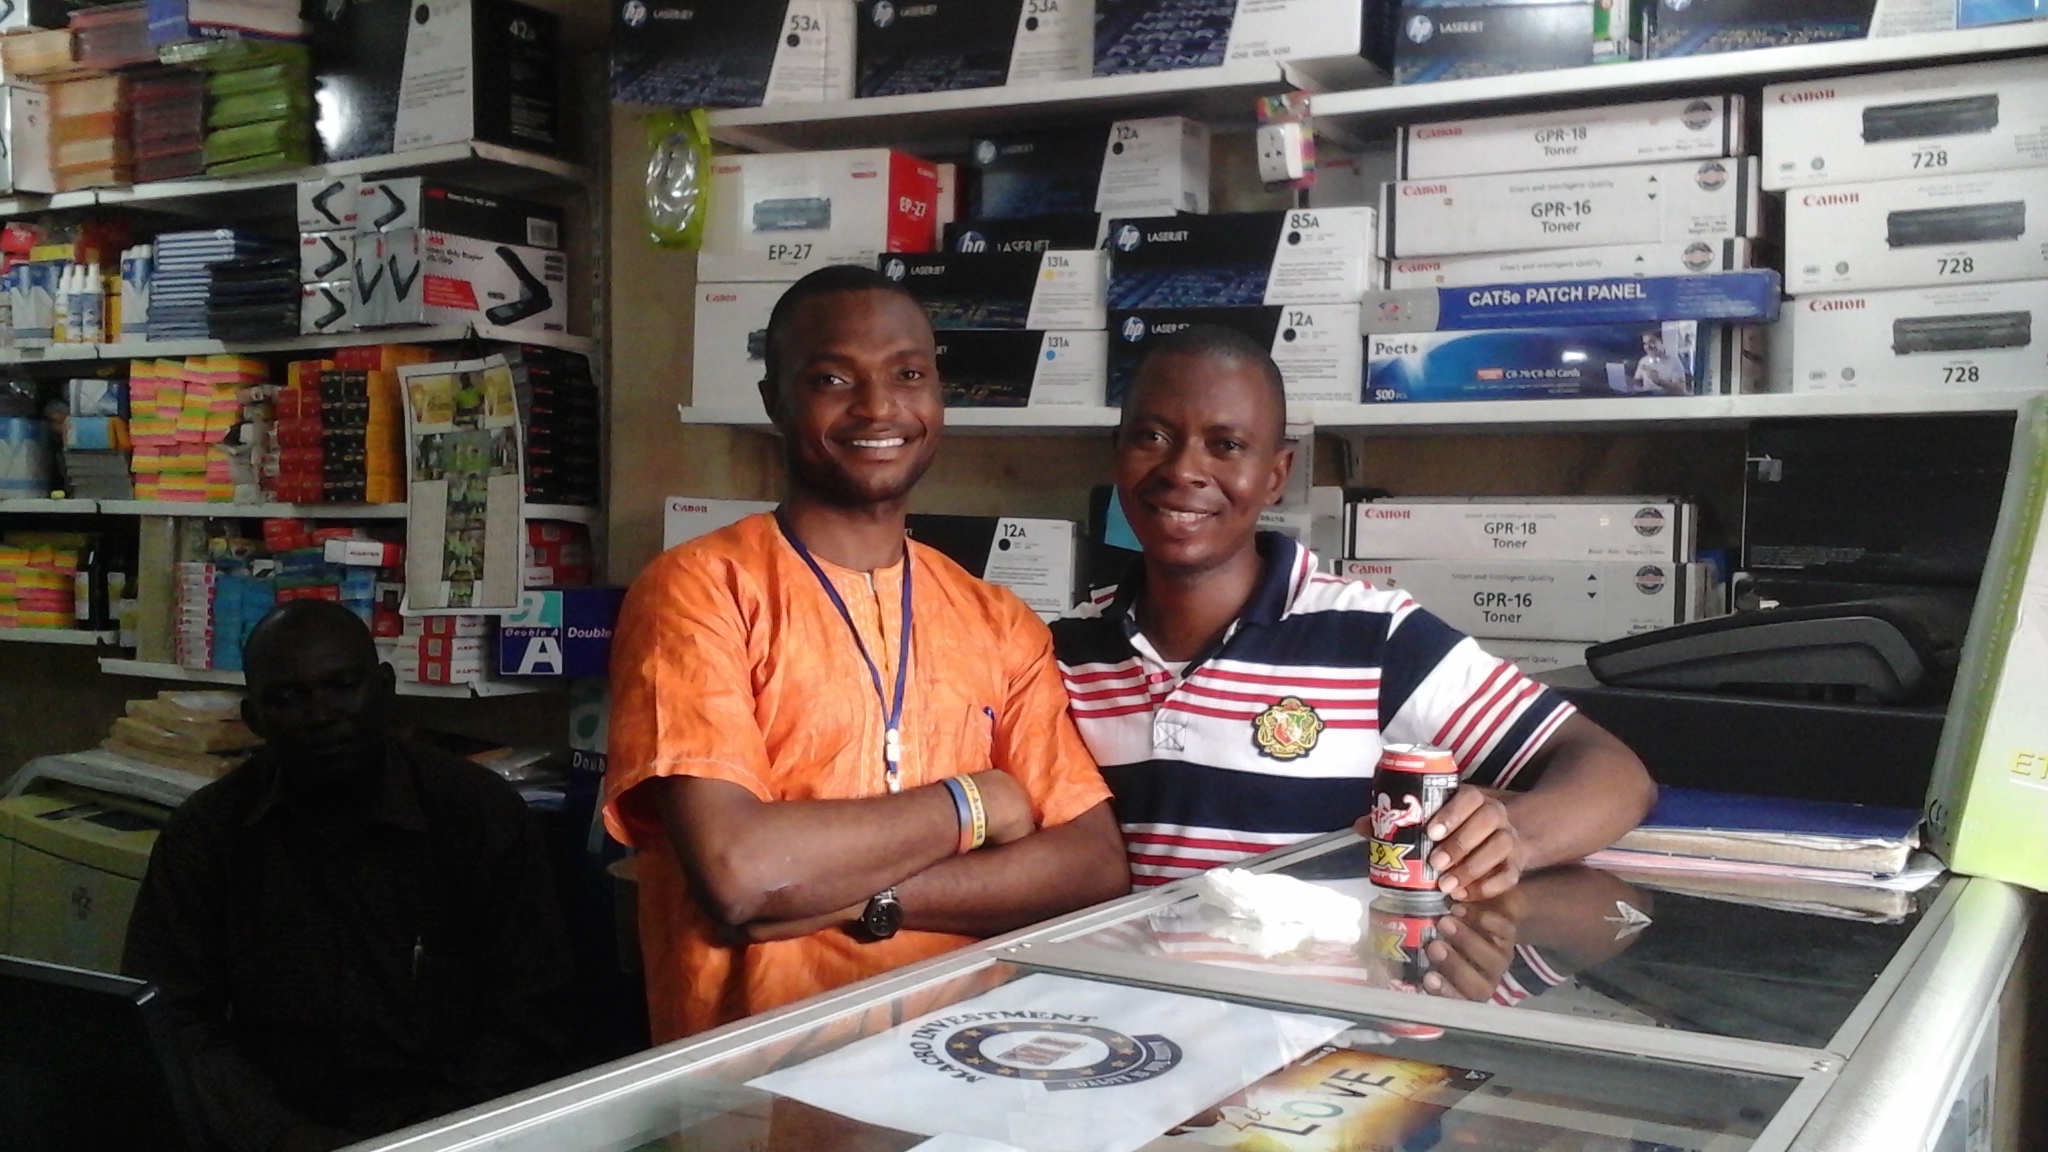 New business relationship formed after receiving microcredit